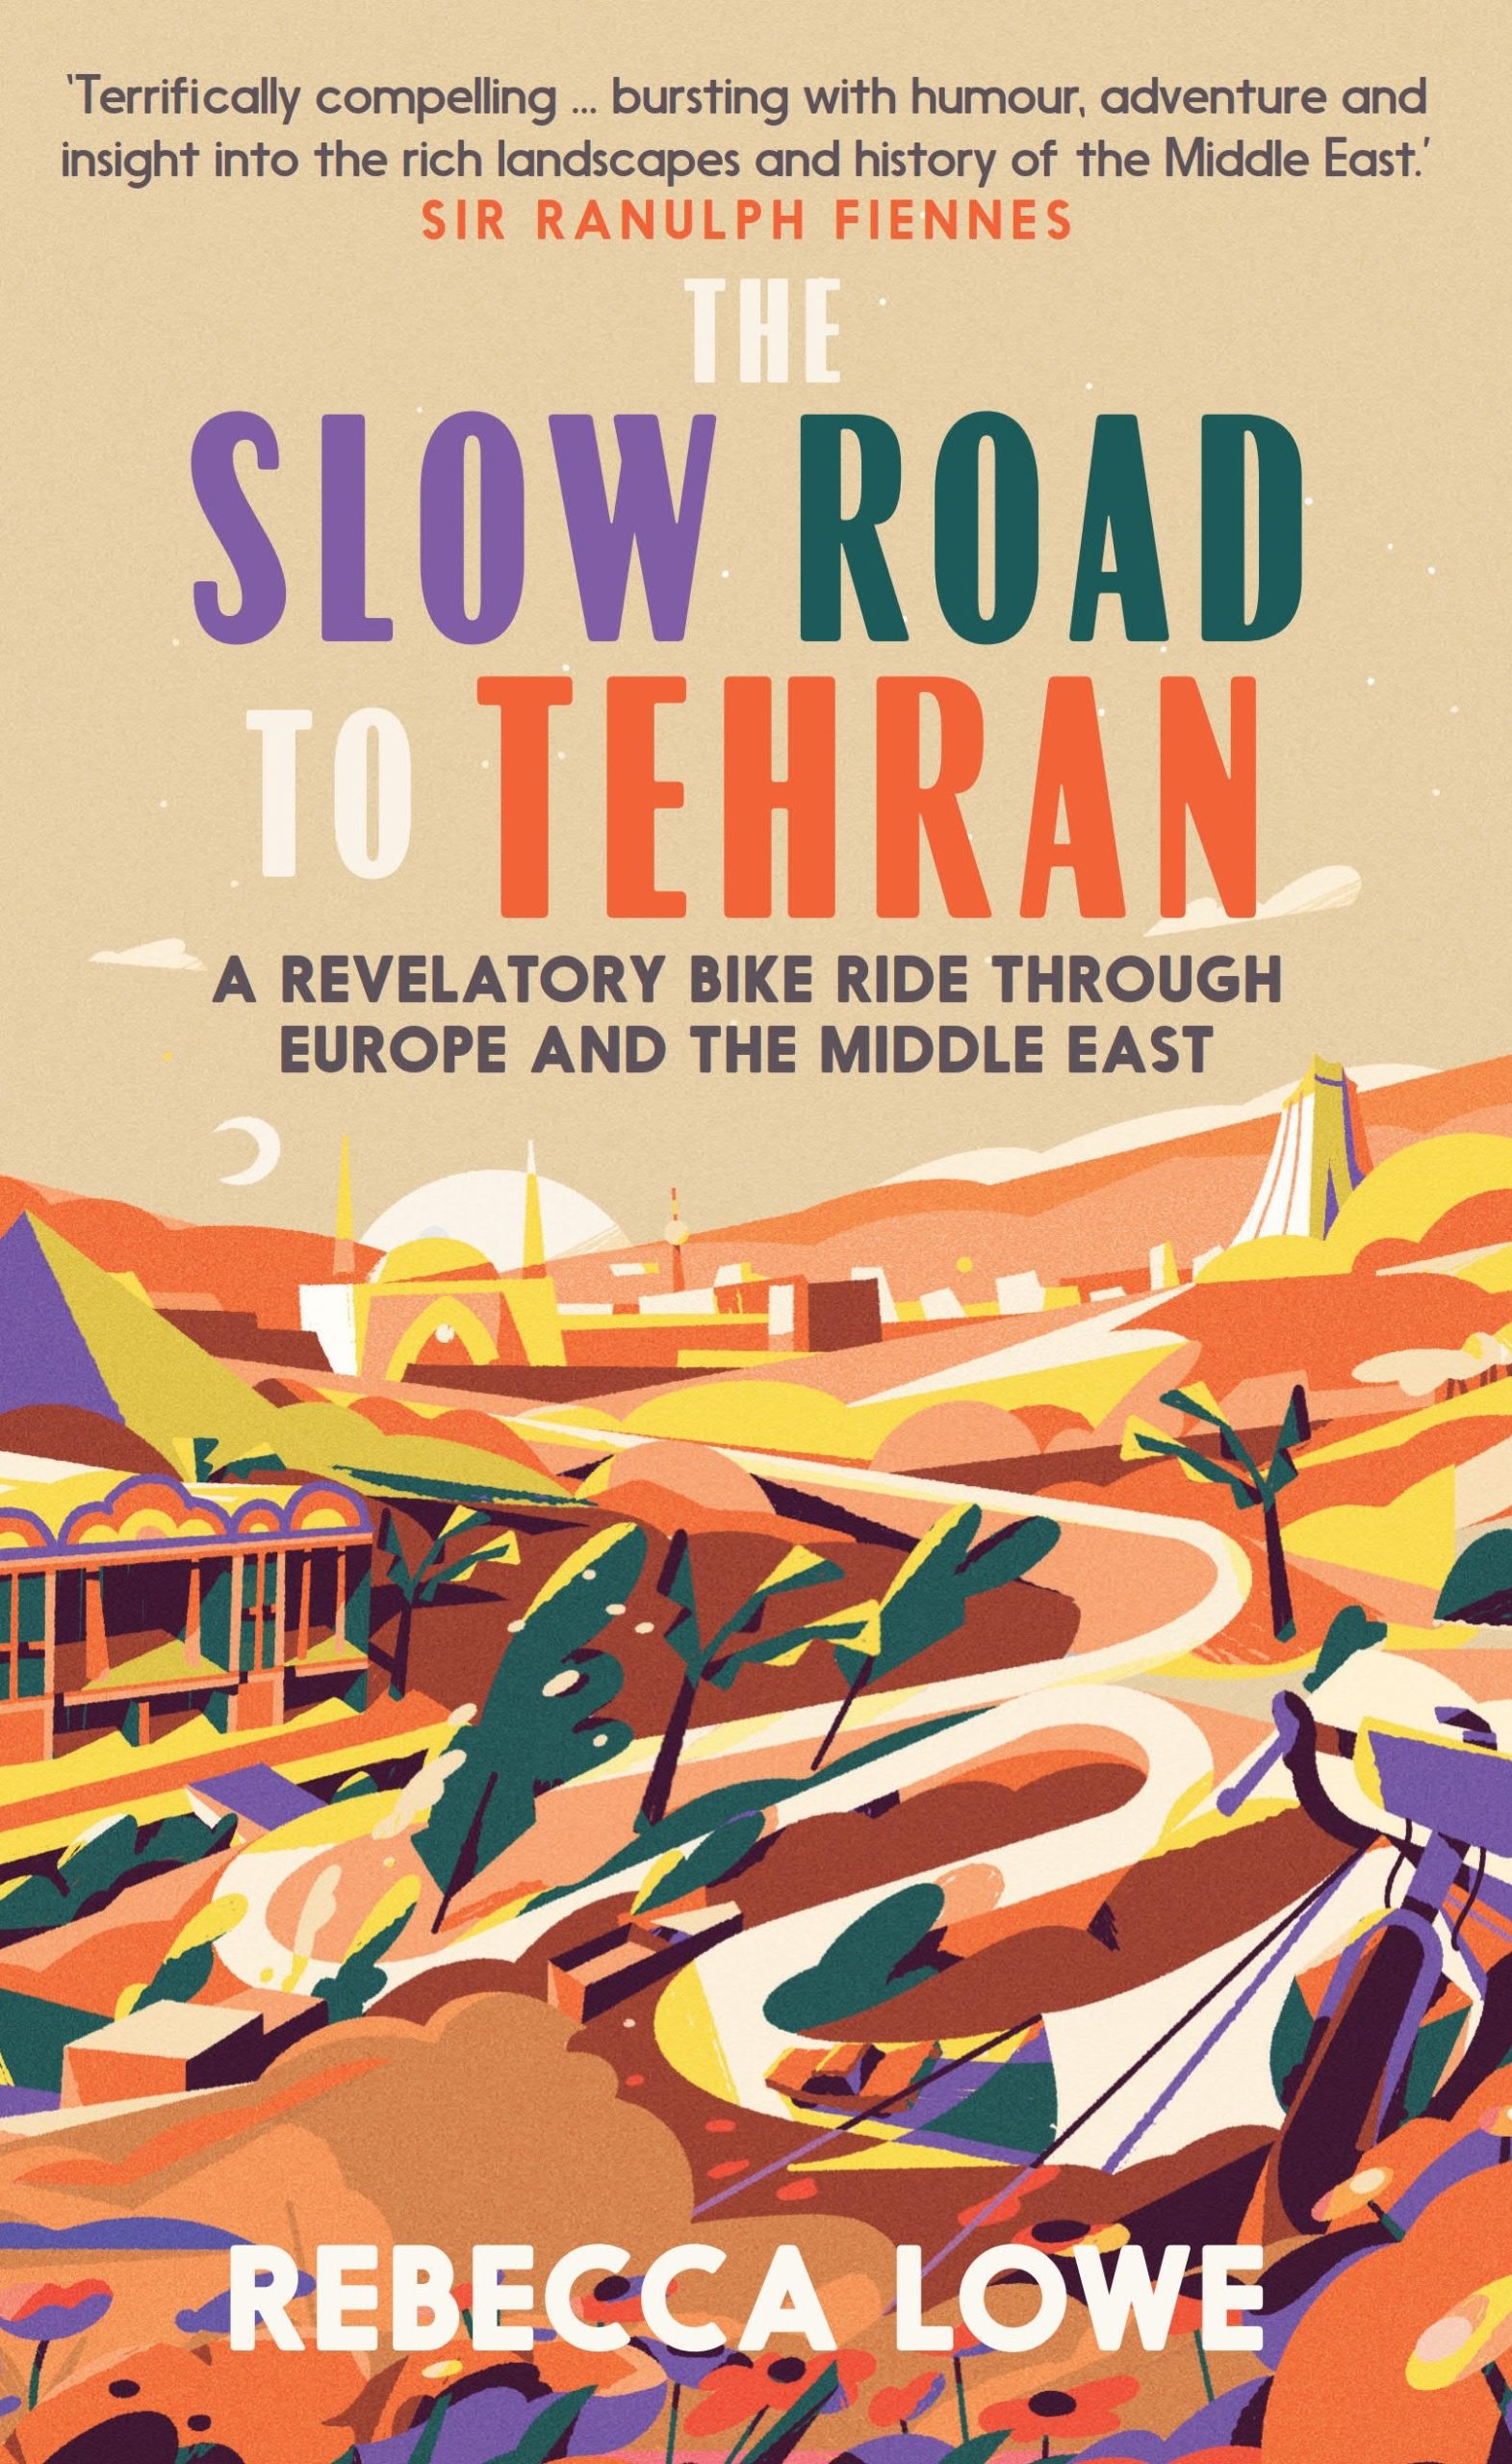 September　East　Slow　Middle　to　The　Revelatory　the　and　A　Europe　Through　Road　Ride　(hardback)　Tehran:　Publishing　Bike　—